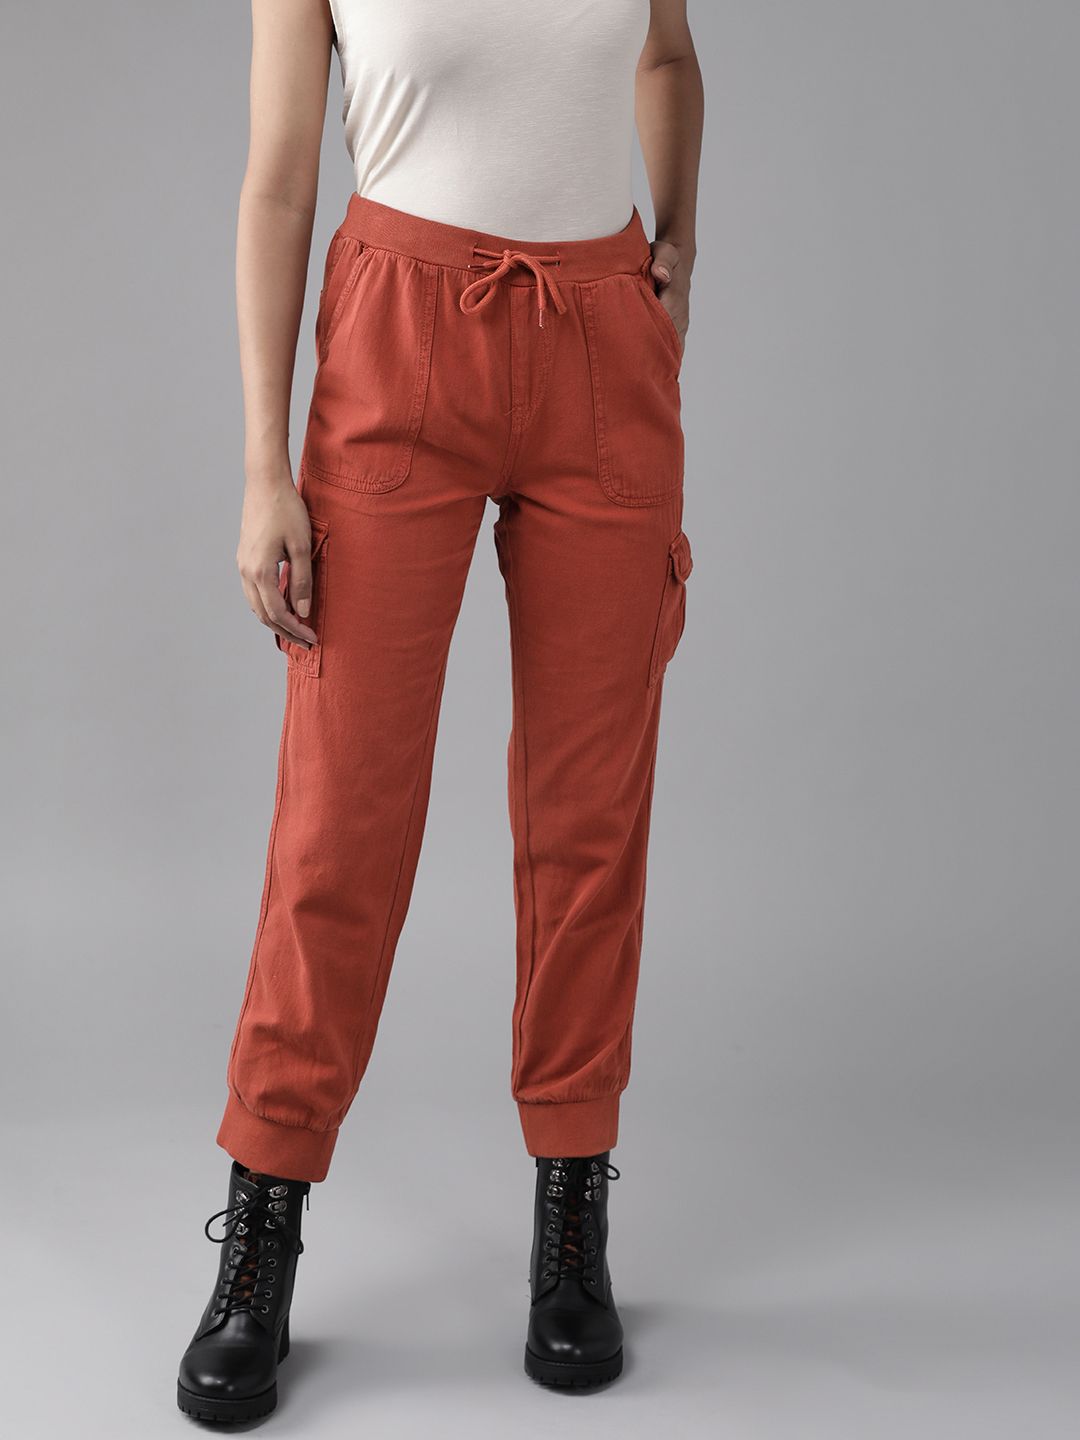 Roadster Women Rust Red Regular Fit Mid-Rise Clean Look Cargo Joggers Jeans Price in India